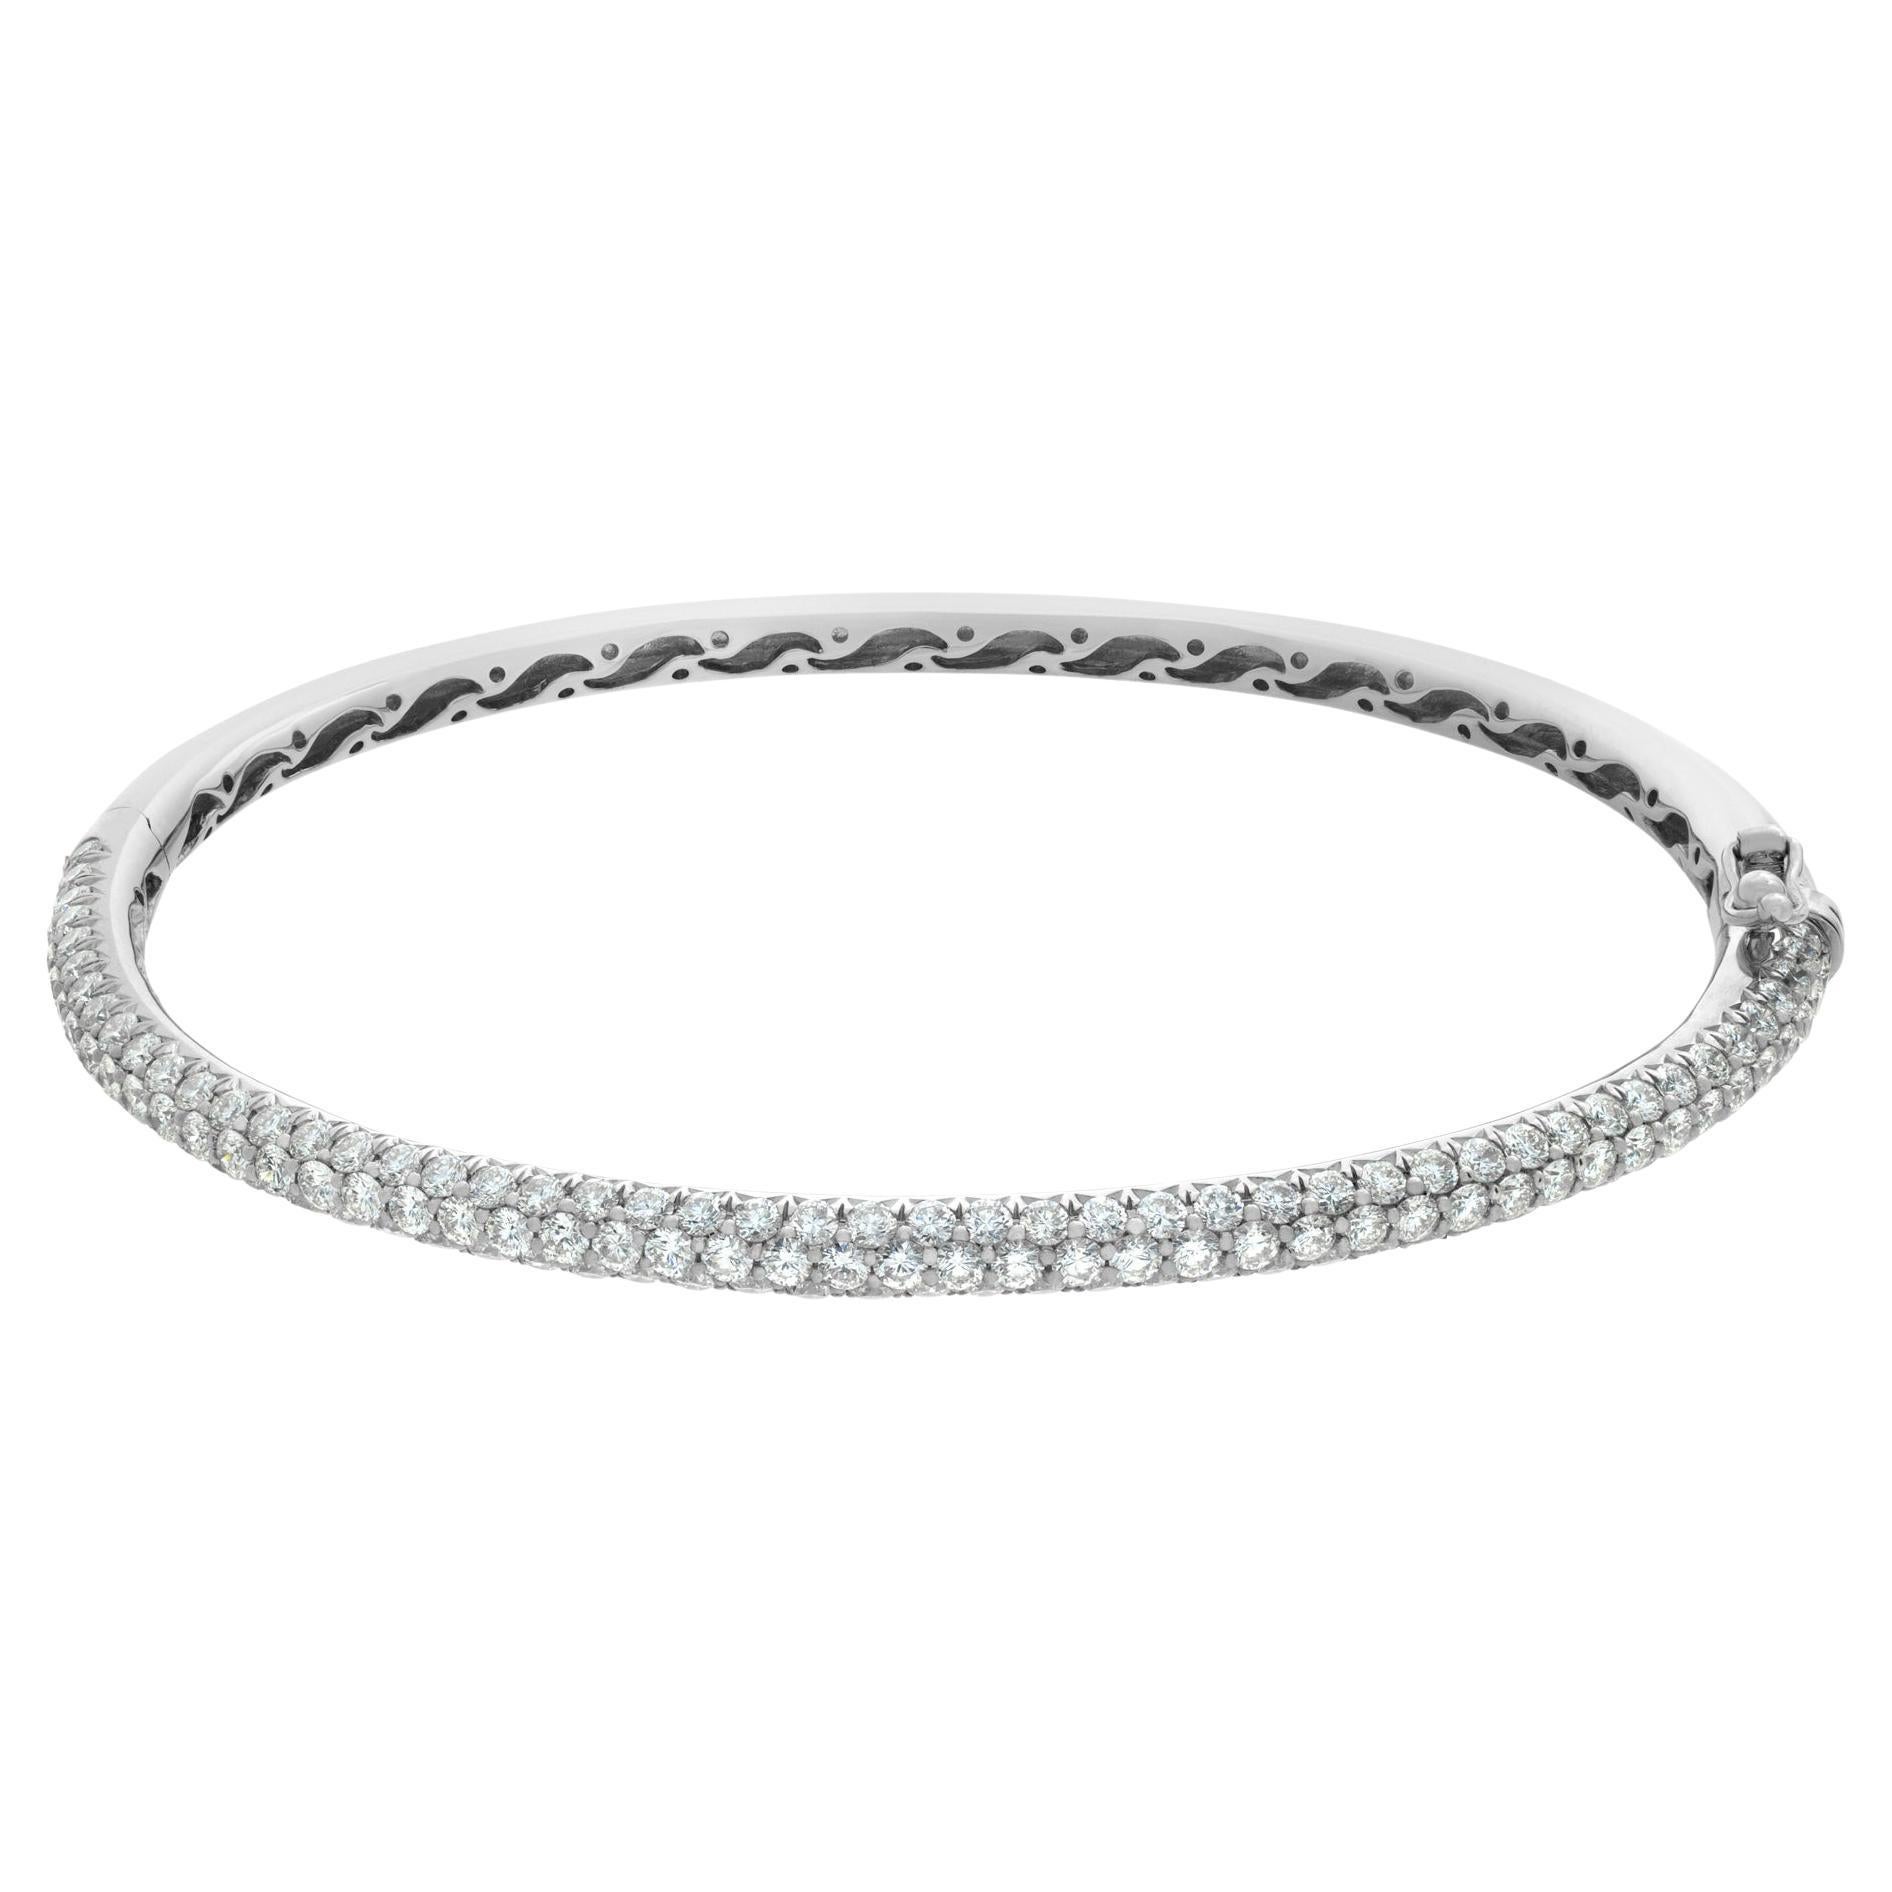 18k White Gold Bangle with 2.86 Carats in Round Brilliant Cut Pave Diamonds